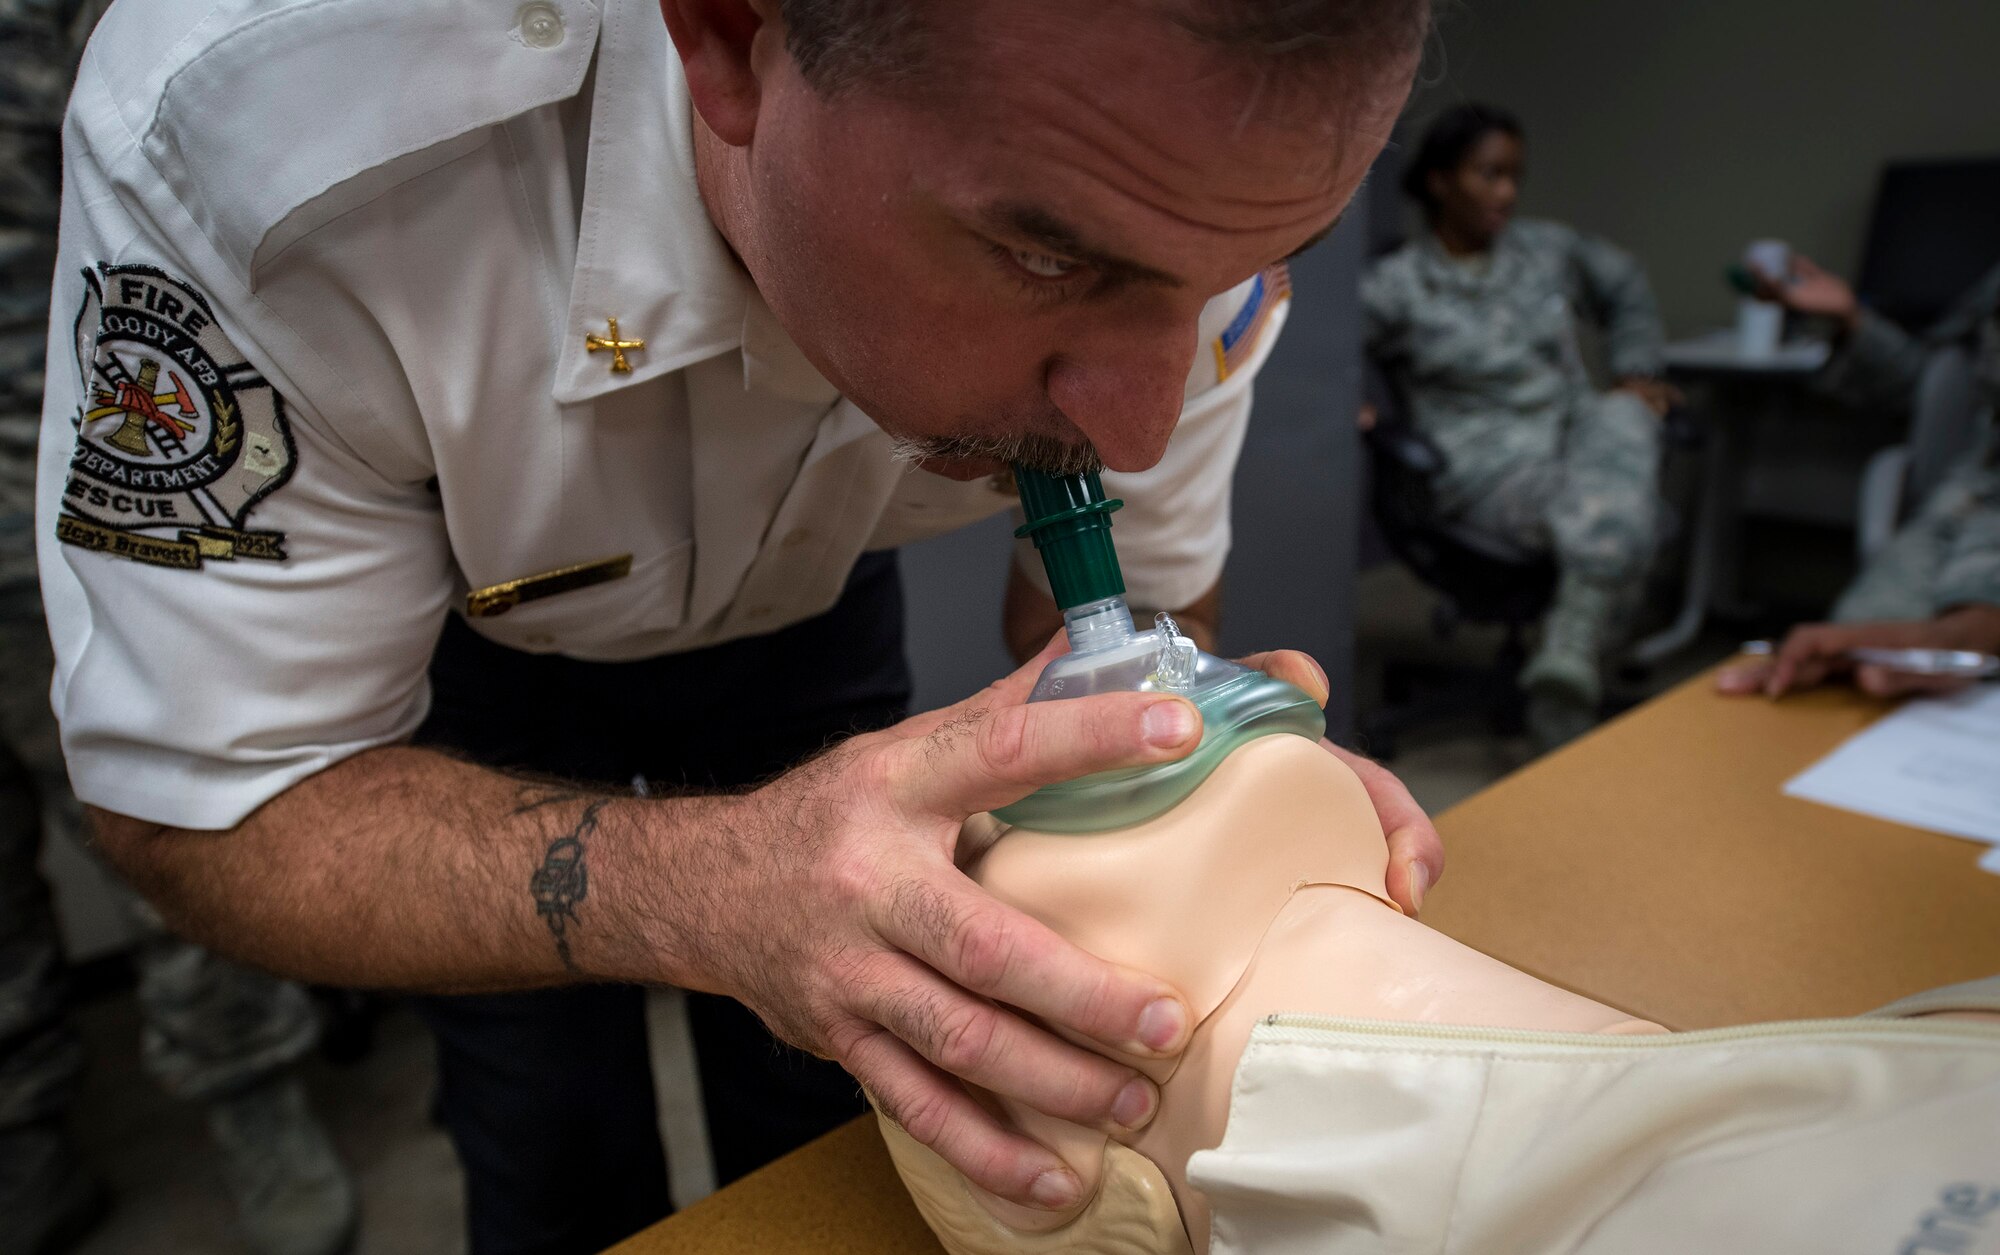 Stephen Wilmot, 23d Civil Engineer Squadron fire chief, performs CPR on a simulated patient during an Emergency Medical Technician refresher course, Oct. 31, 2016, at Moody Air Force Base, Ga. Wilmot used a jaw-thrust chin lift to ensure the patient was receiving the air. (U.S. Air Force photo by Airman 1st Class Janiqua P. Robinson)